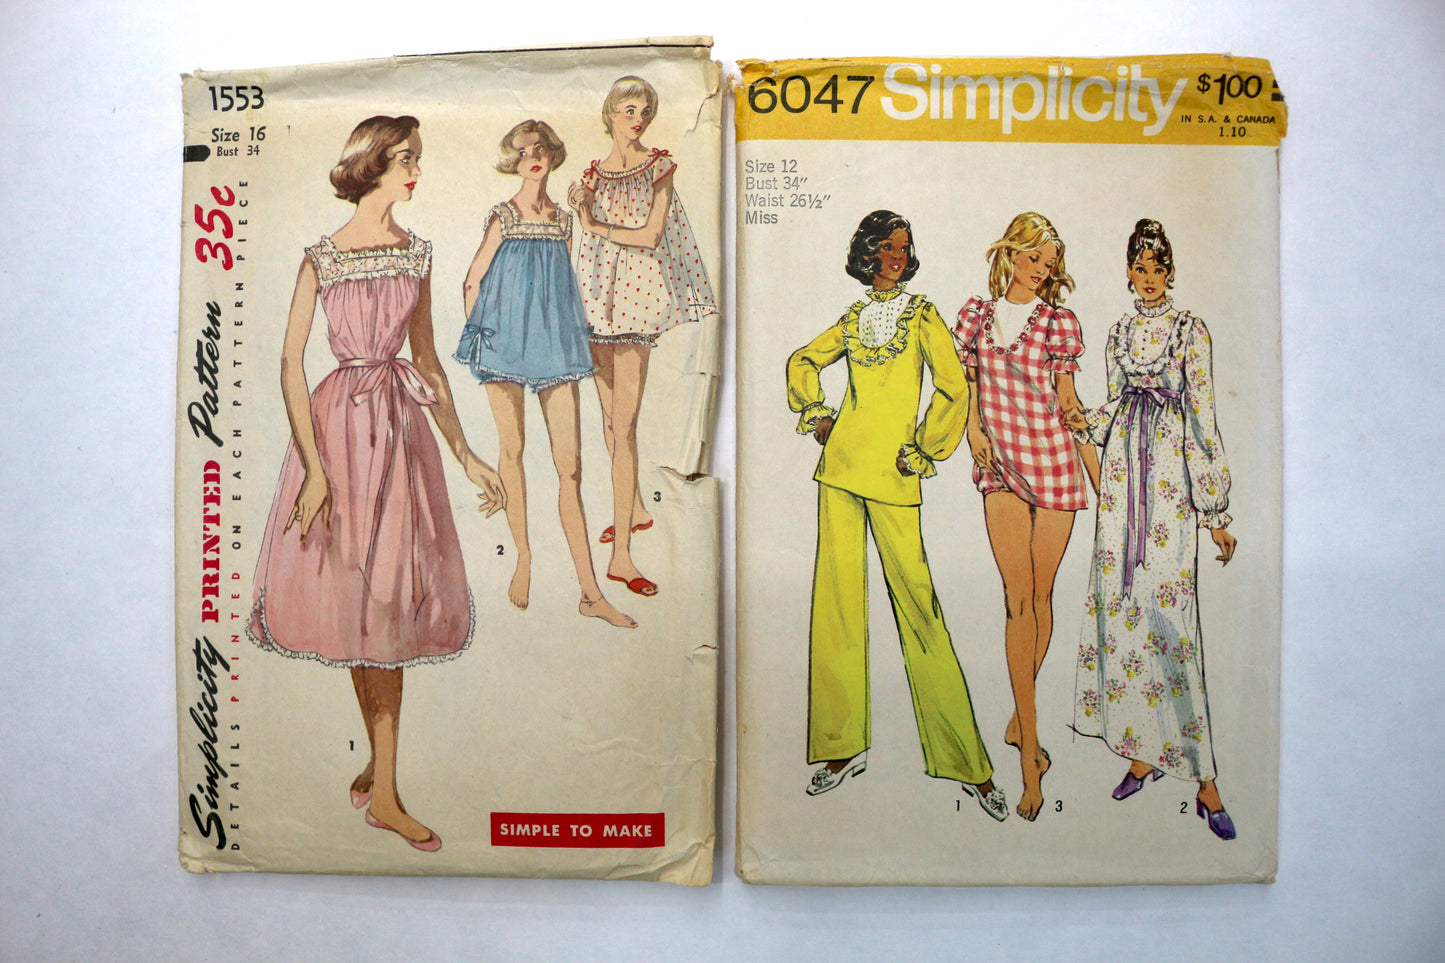 Simplicity 6047 Sewing Pattern or Simplicity 1553 Sewing Pattern